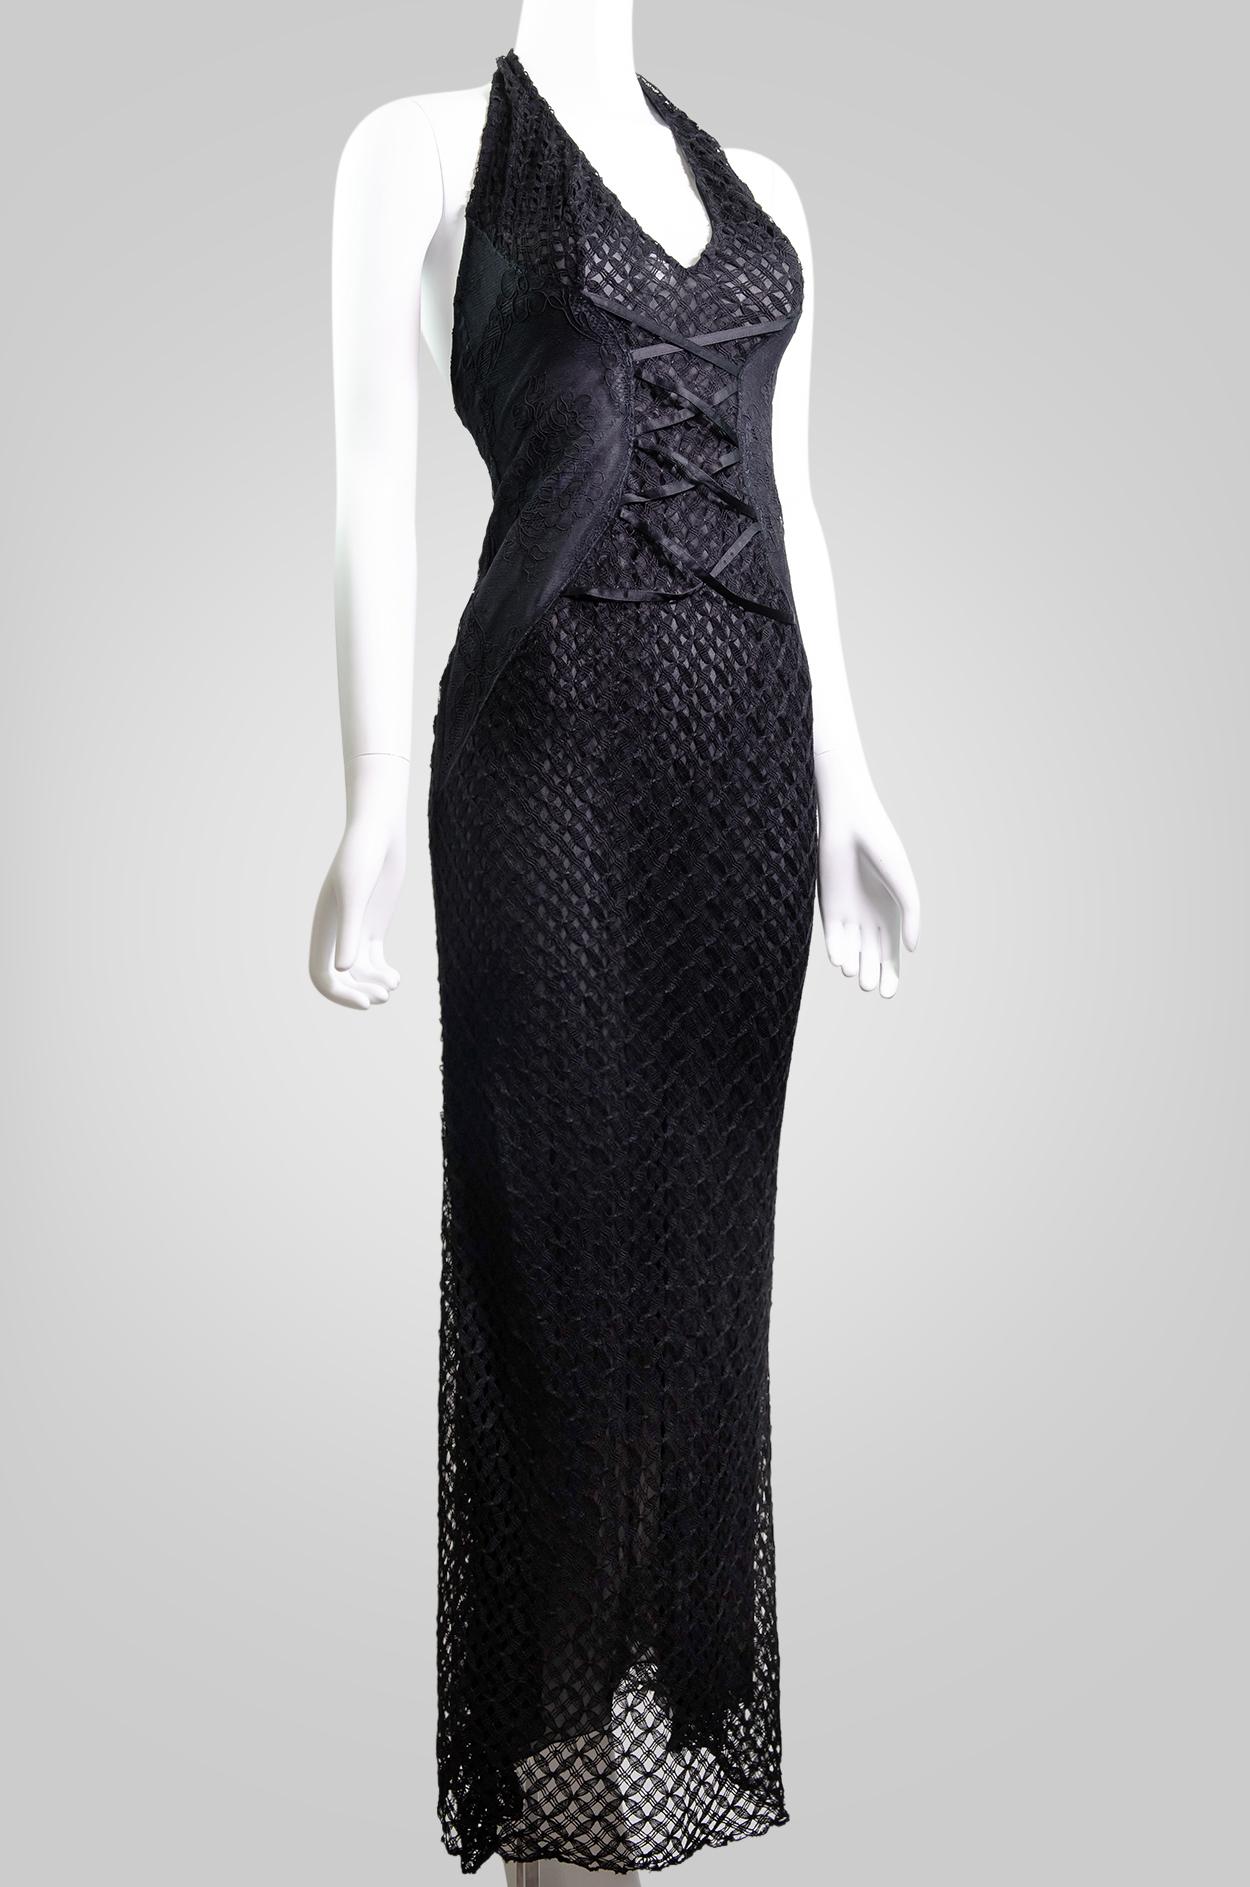 VERSACE S/S 2002 Vintage Sheer Lace Knit Gown  For Sale 5